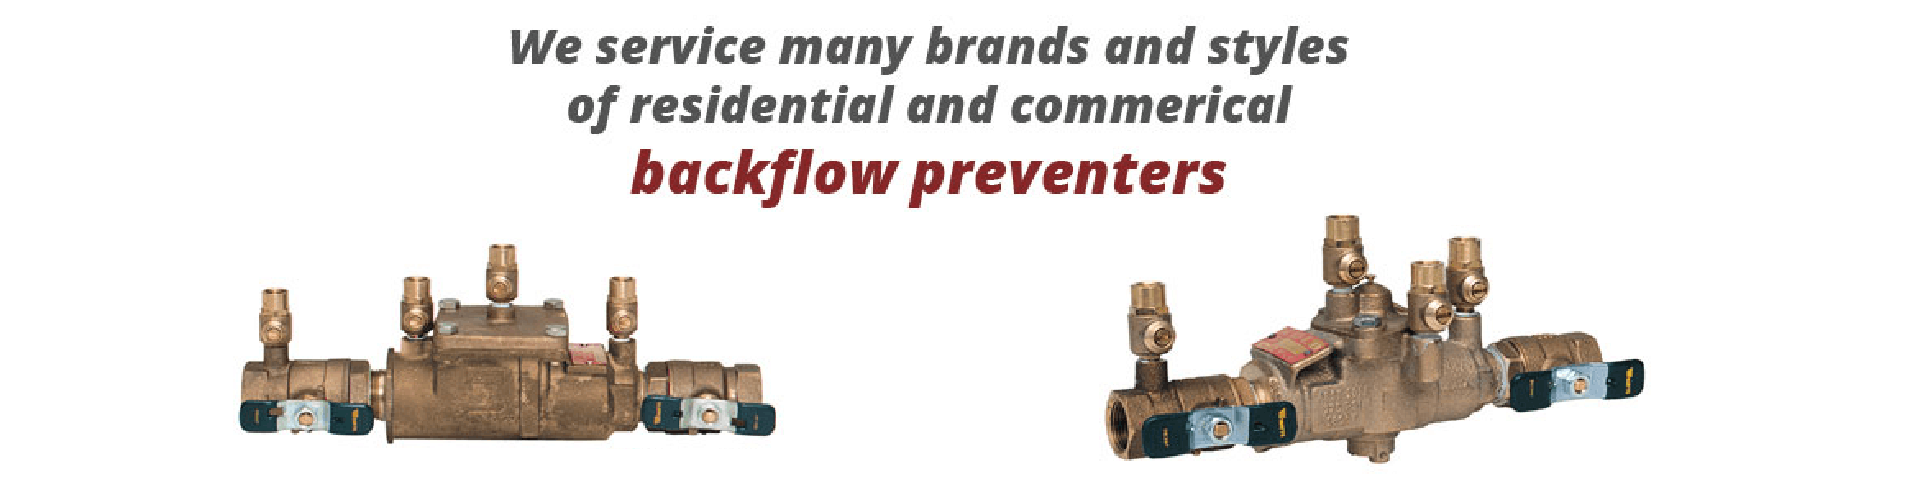 Residential and commercial backflow preventers